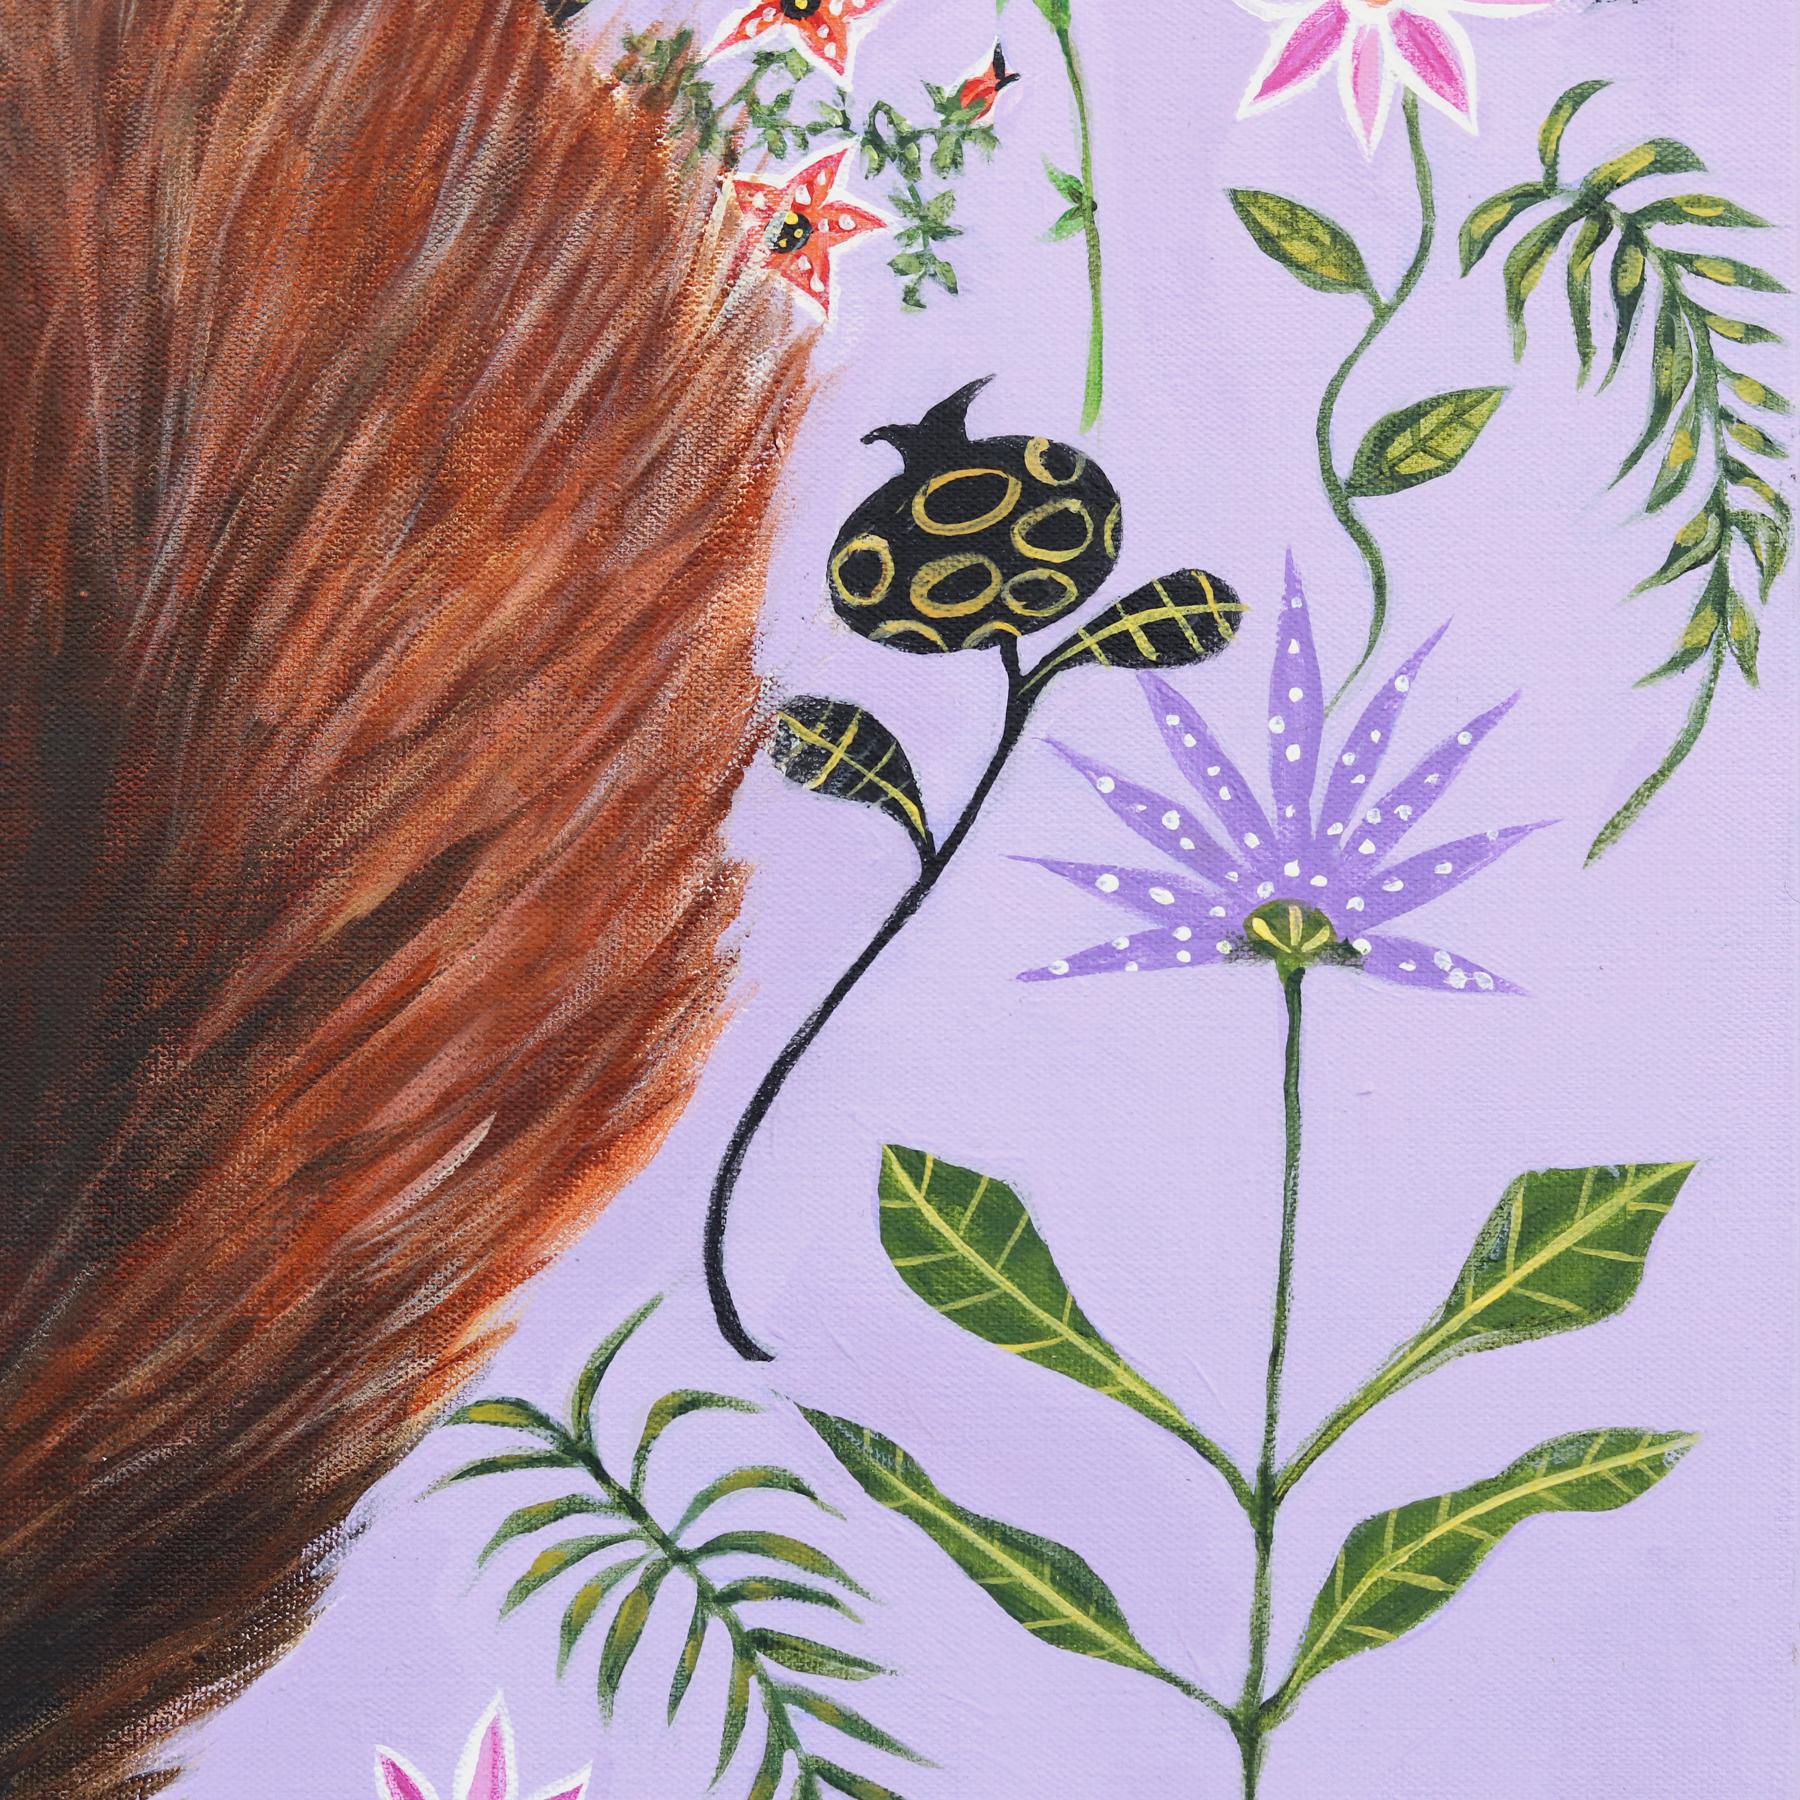 Naomi Jones's richly patterned realistic paintings focus on the preservation of vulnerable wildlife. Jones finds catharsis in painting soulful animals. Portraits of vulnerable species native to the North American landscape are painted with an